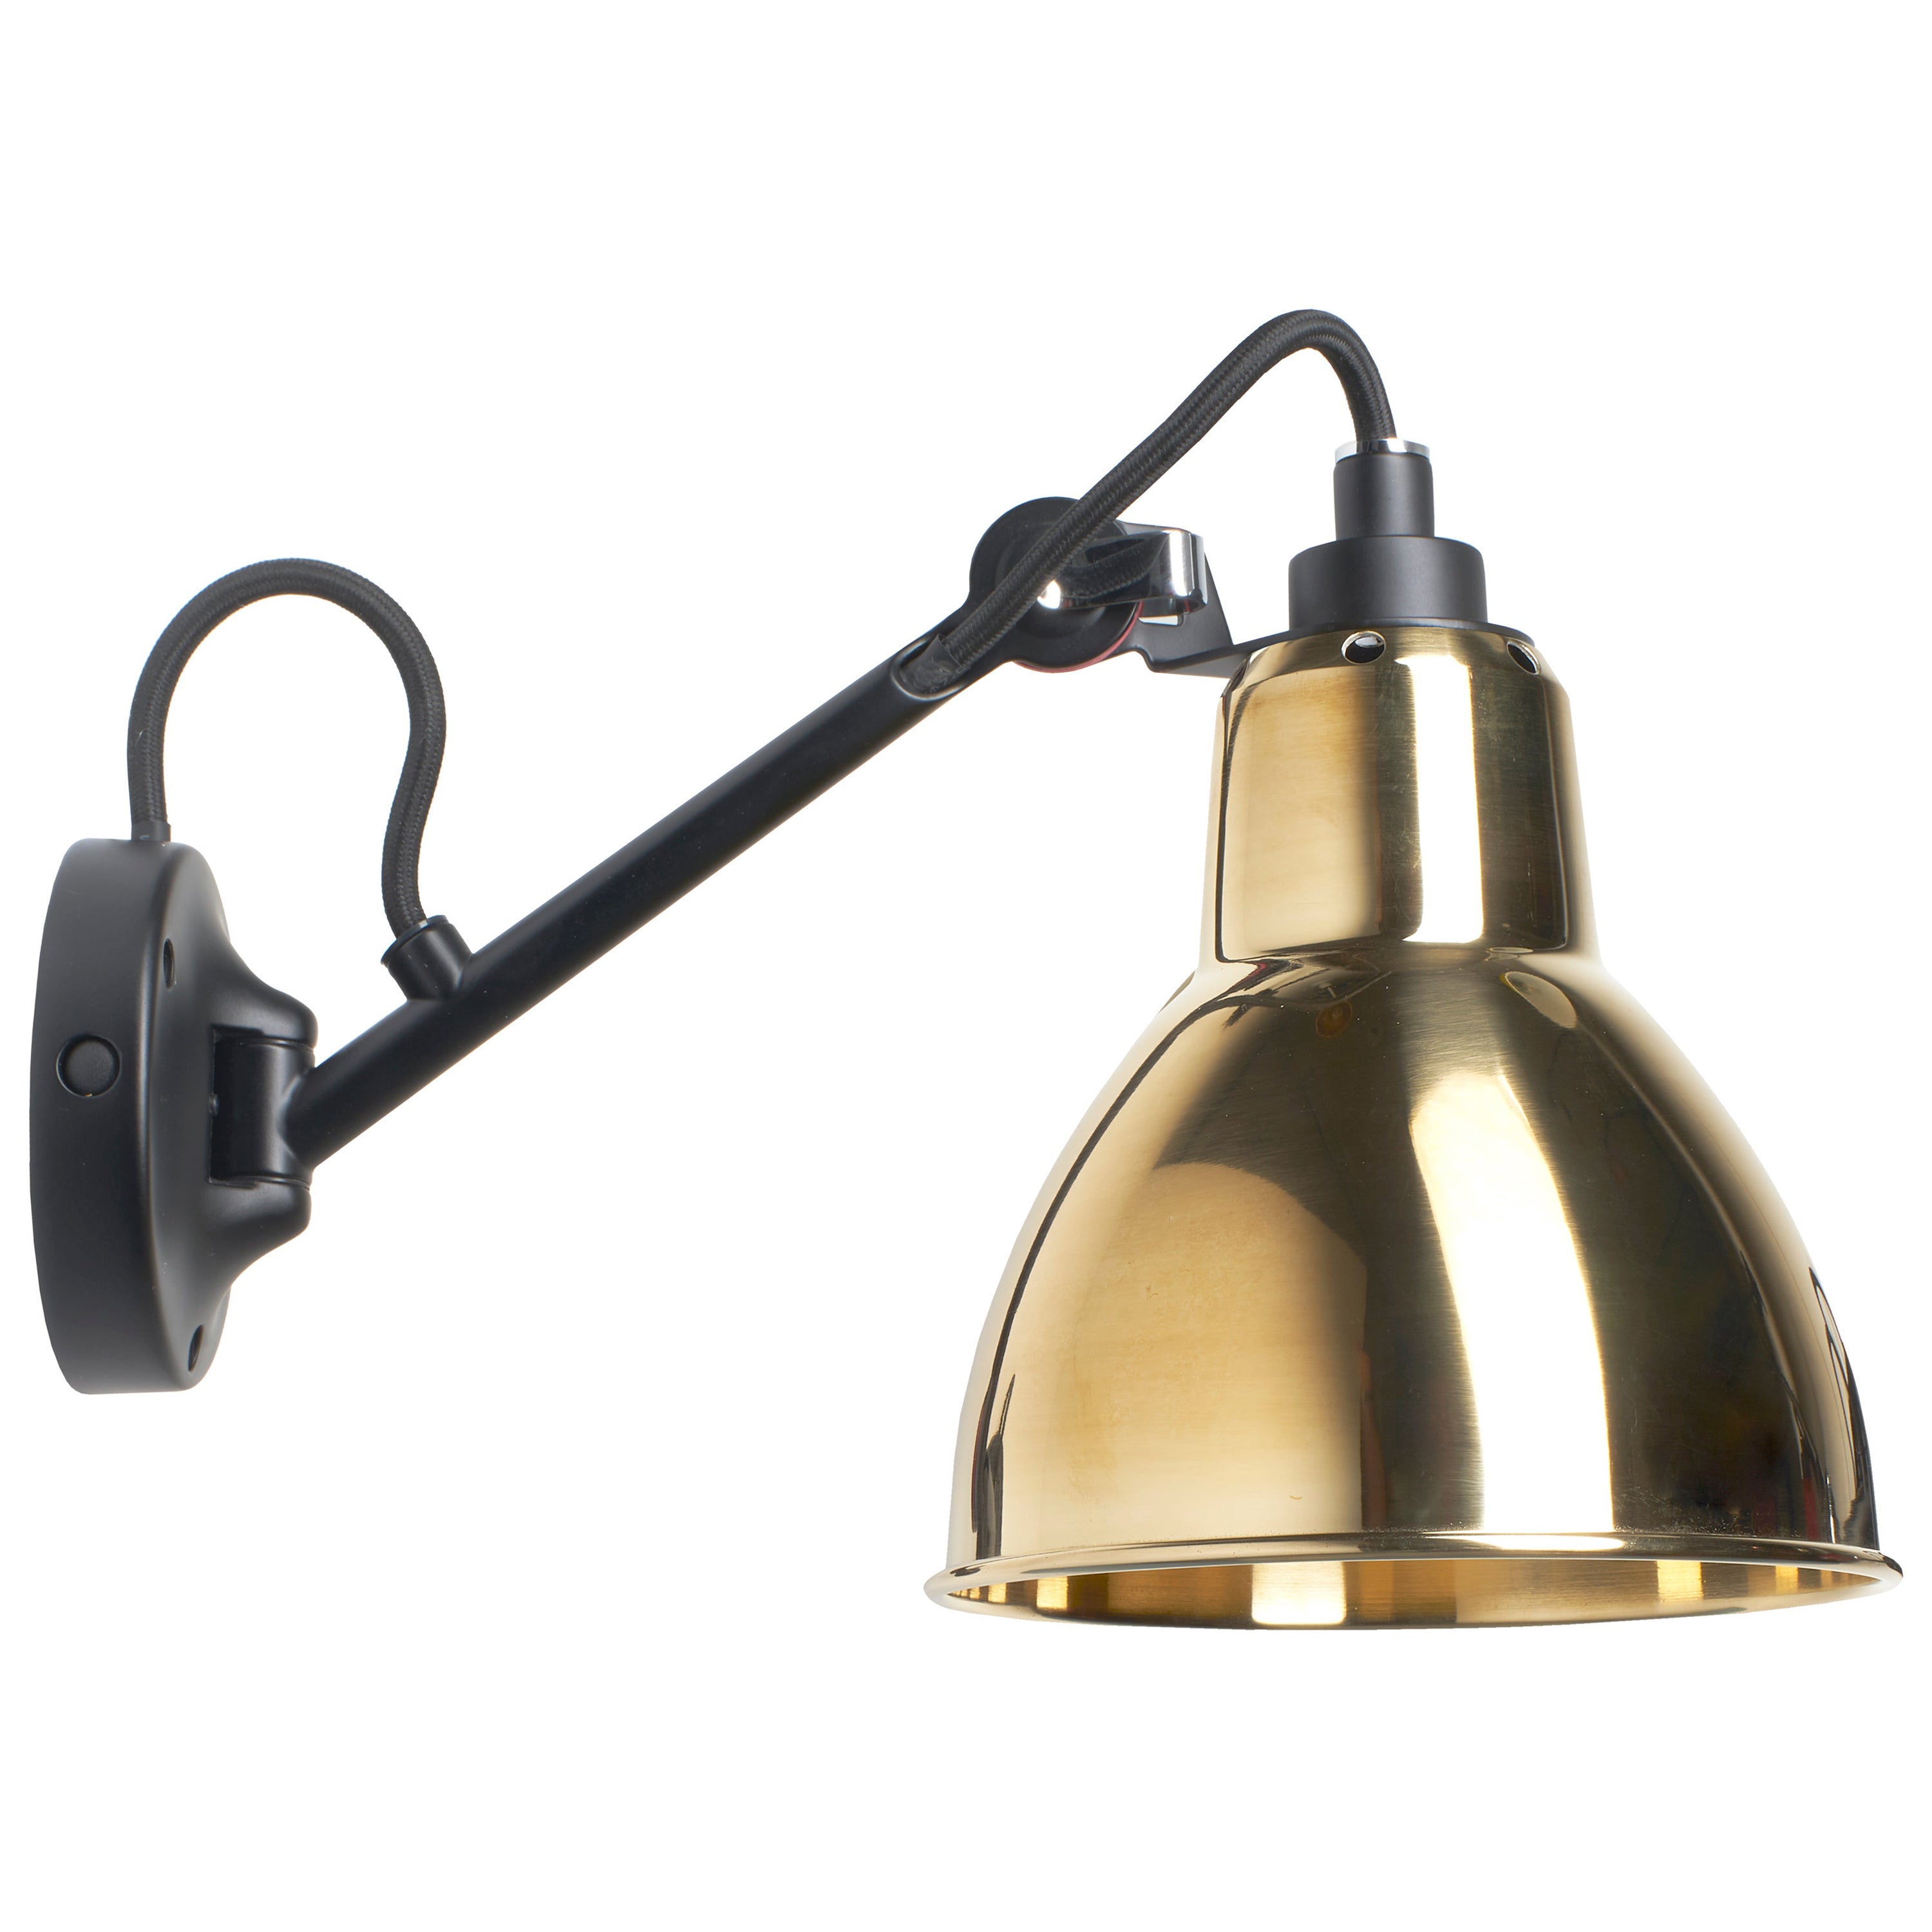 DCW Editions La Lampe Gras N°104 Wall Lamp in Black Arm and Brass Shade For Sale